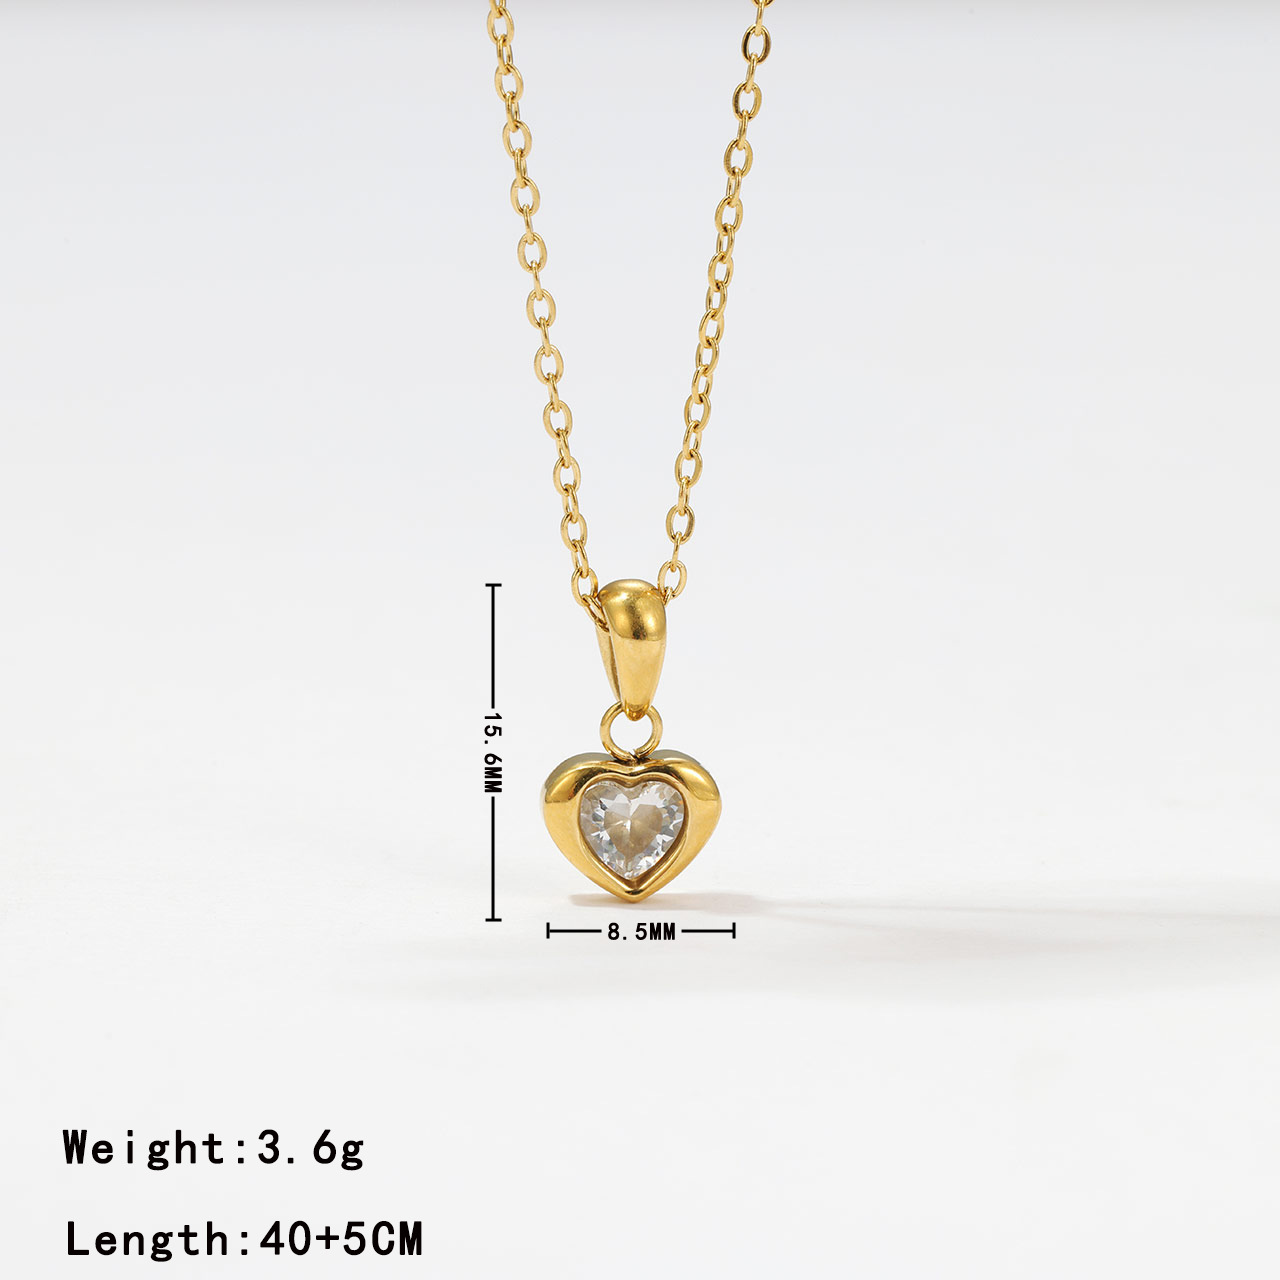 5:Necklace - Gold clear zircon